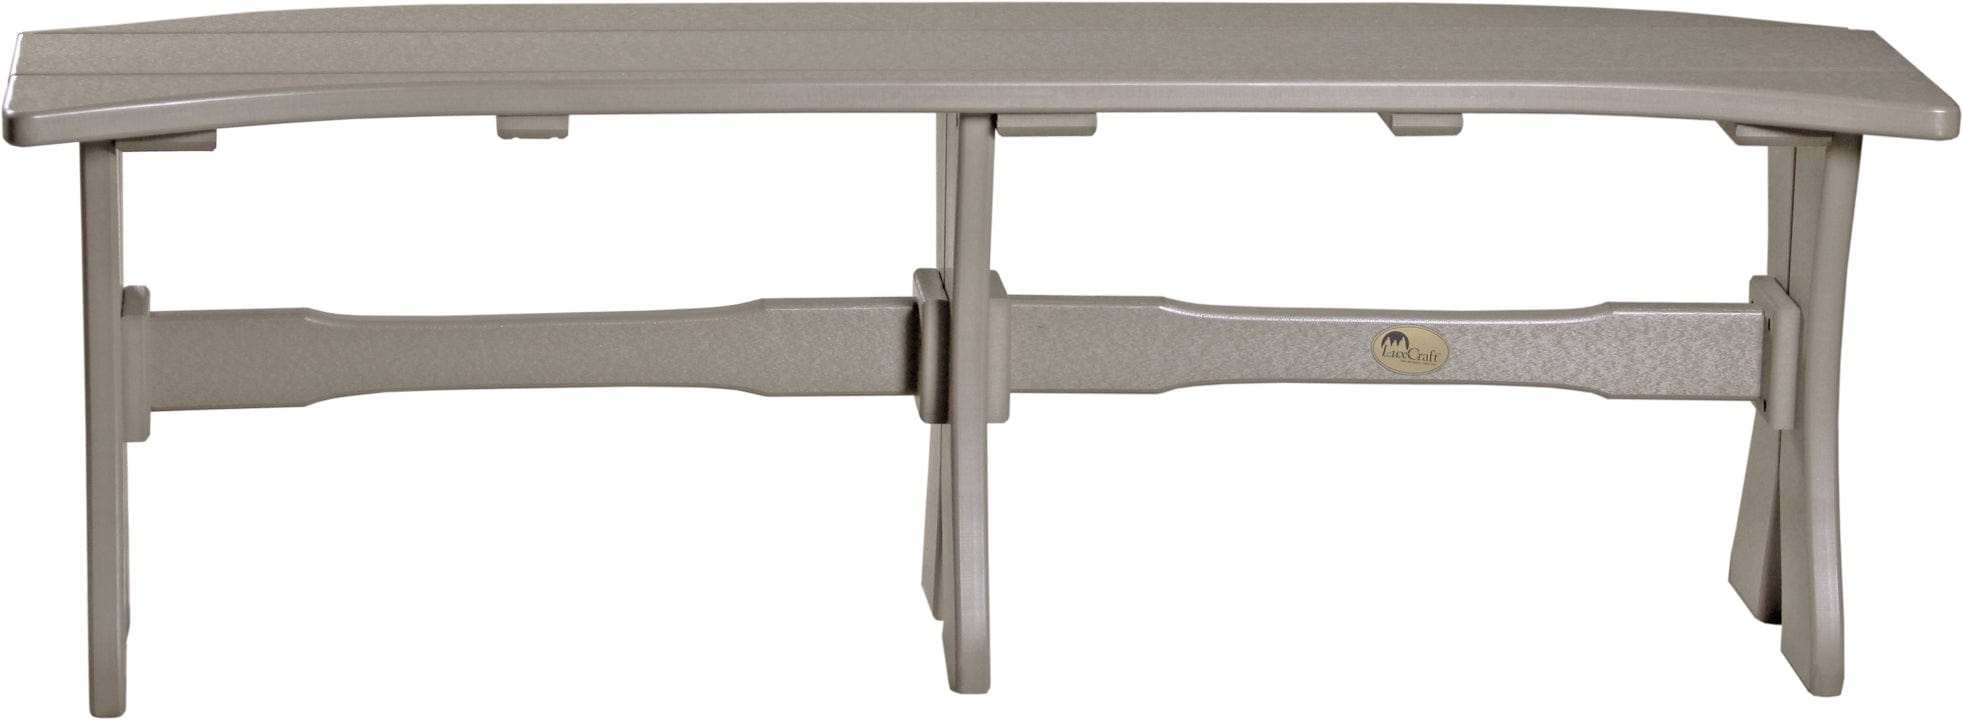 LuxCraft 52" Table Bench P52TB